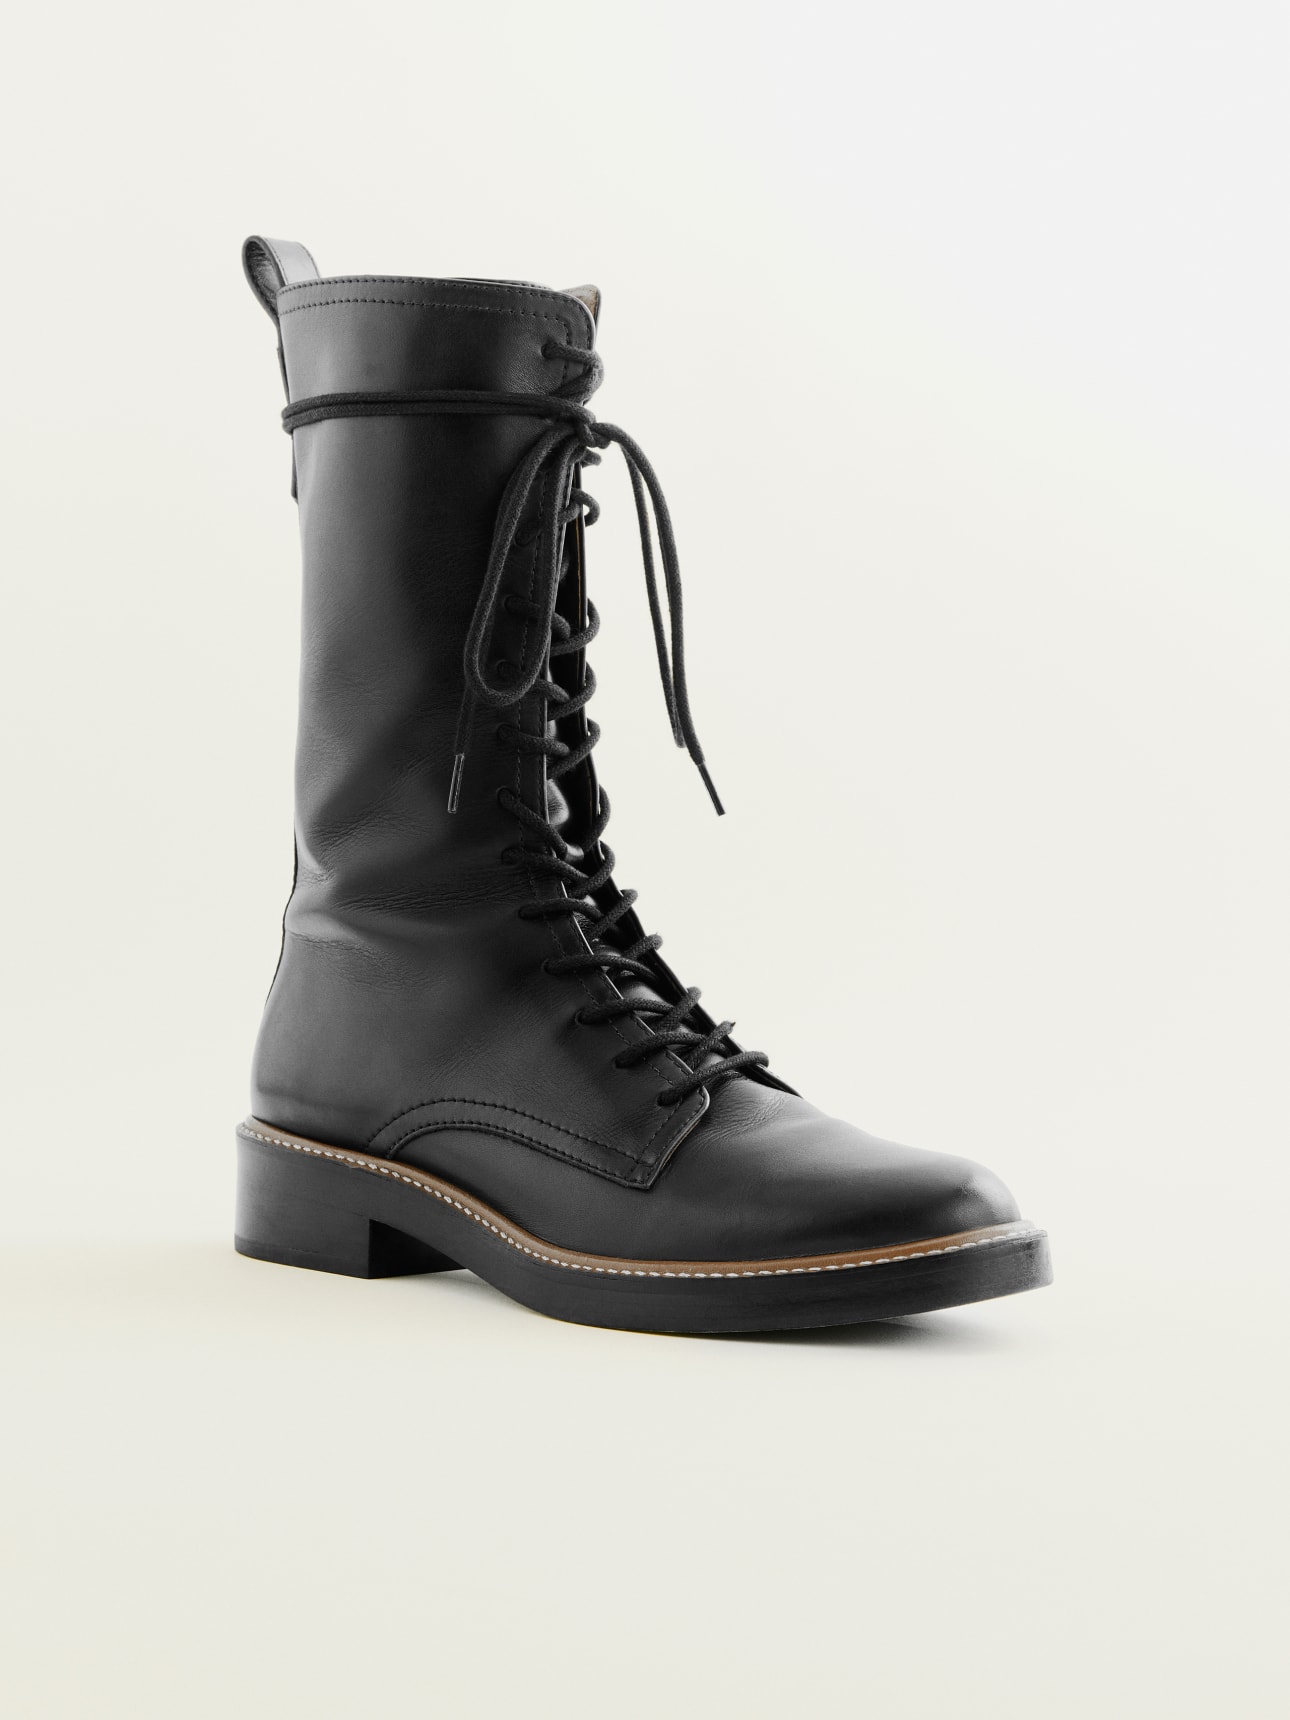 30mm leather combat boots